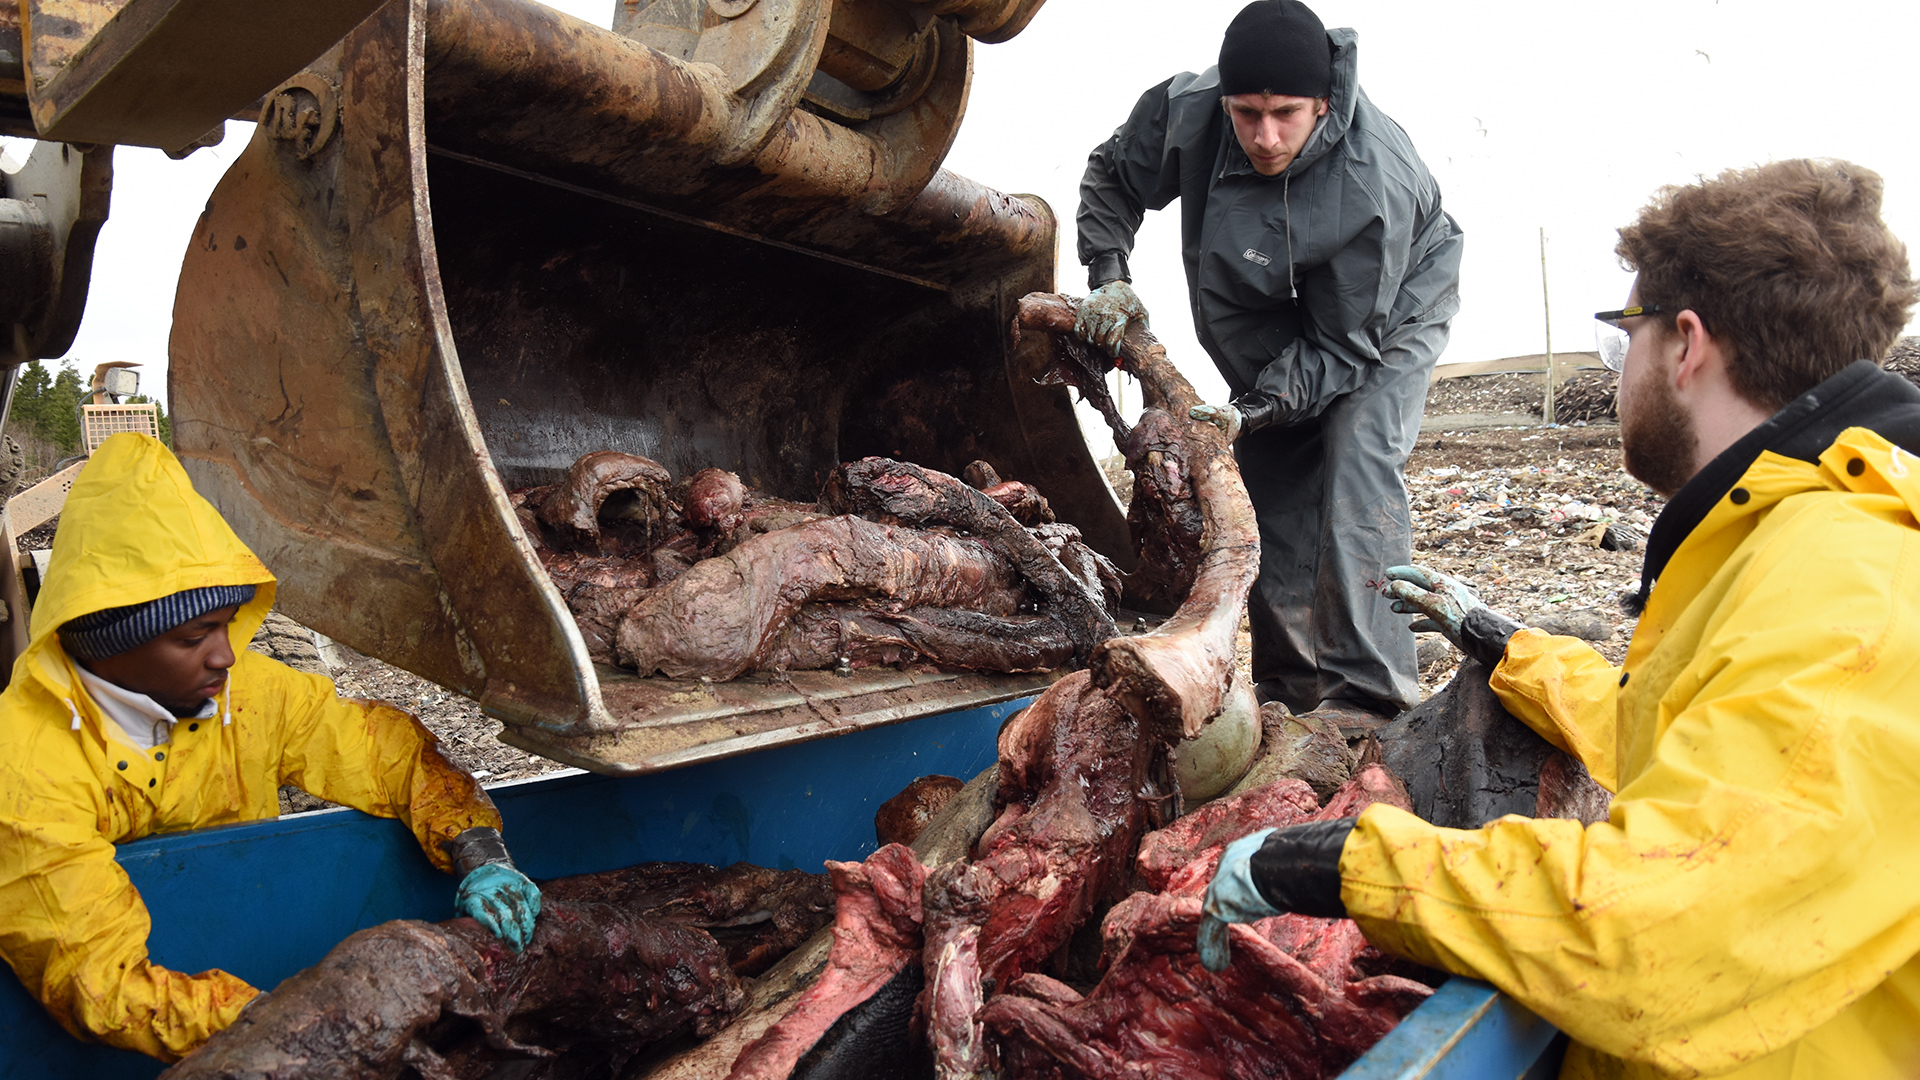 Three people transfer the still partially flesh-covered bones from a bin onto the bucket of a front-end loader.